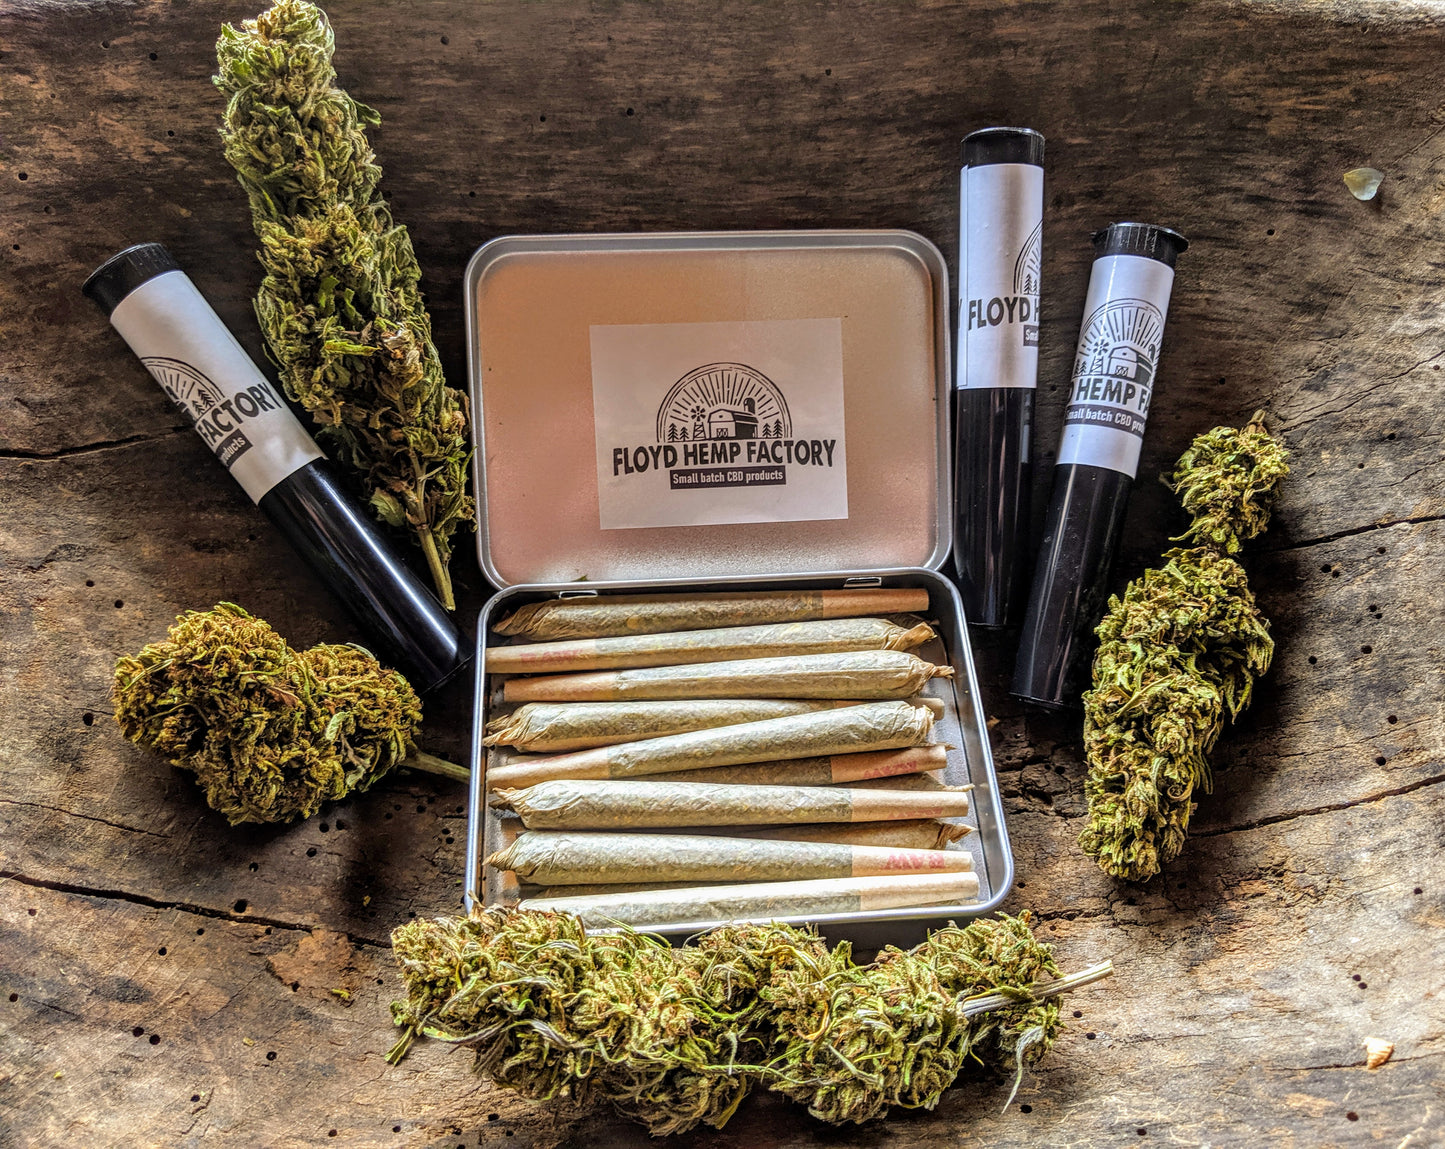 Prerolls - Organically Grown and all natural